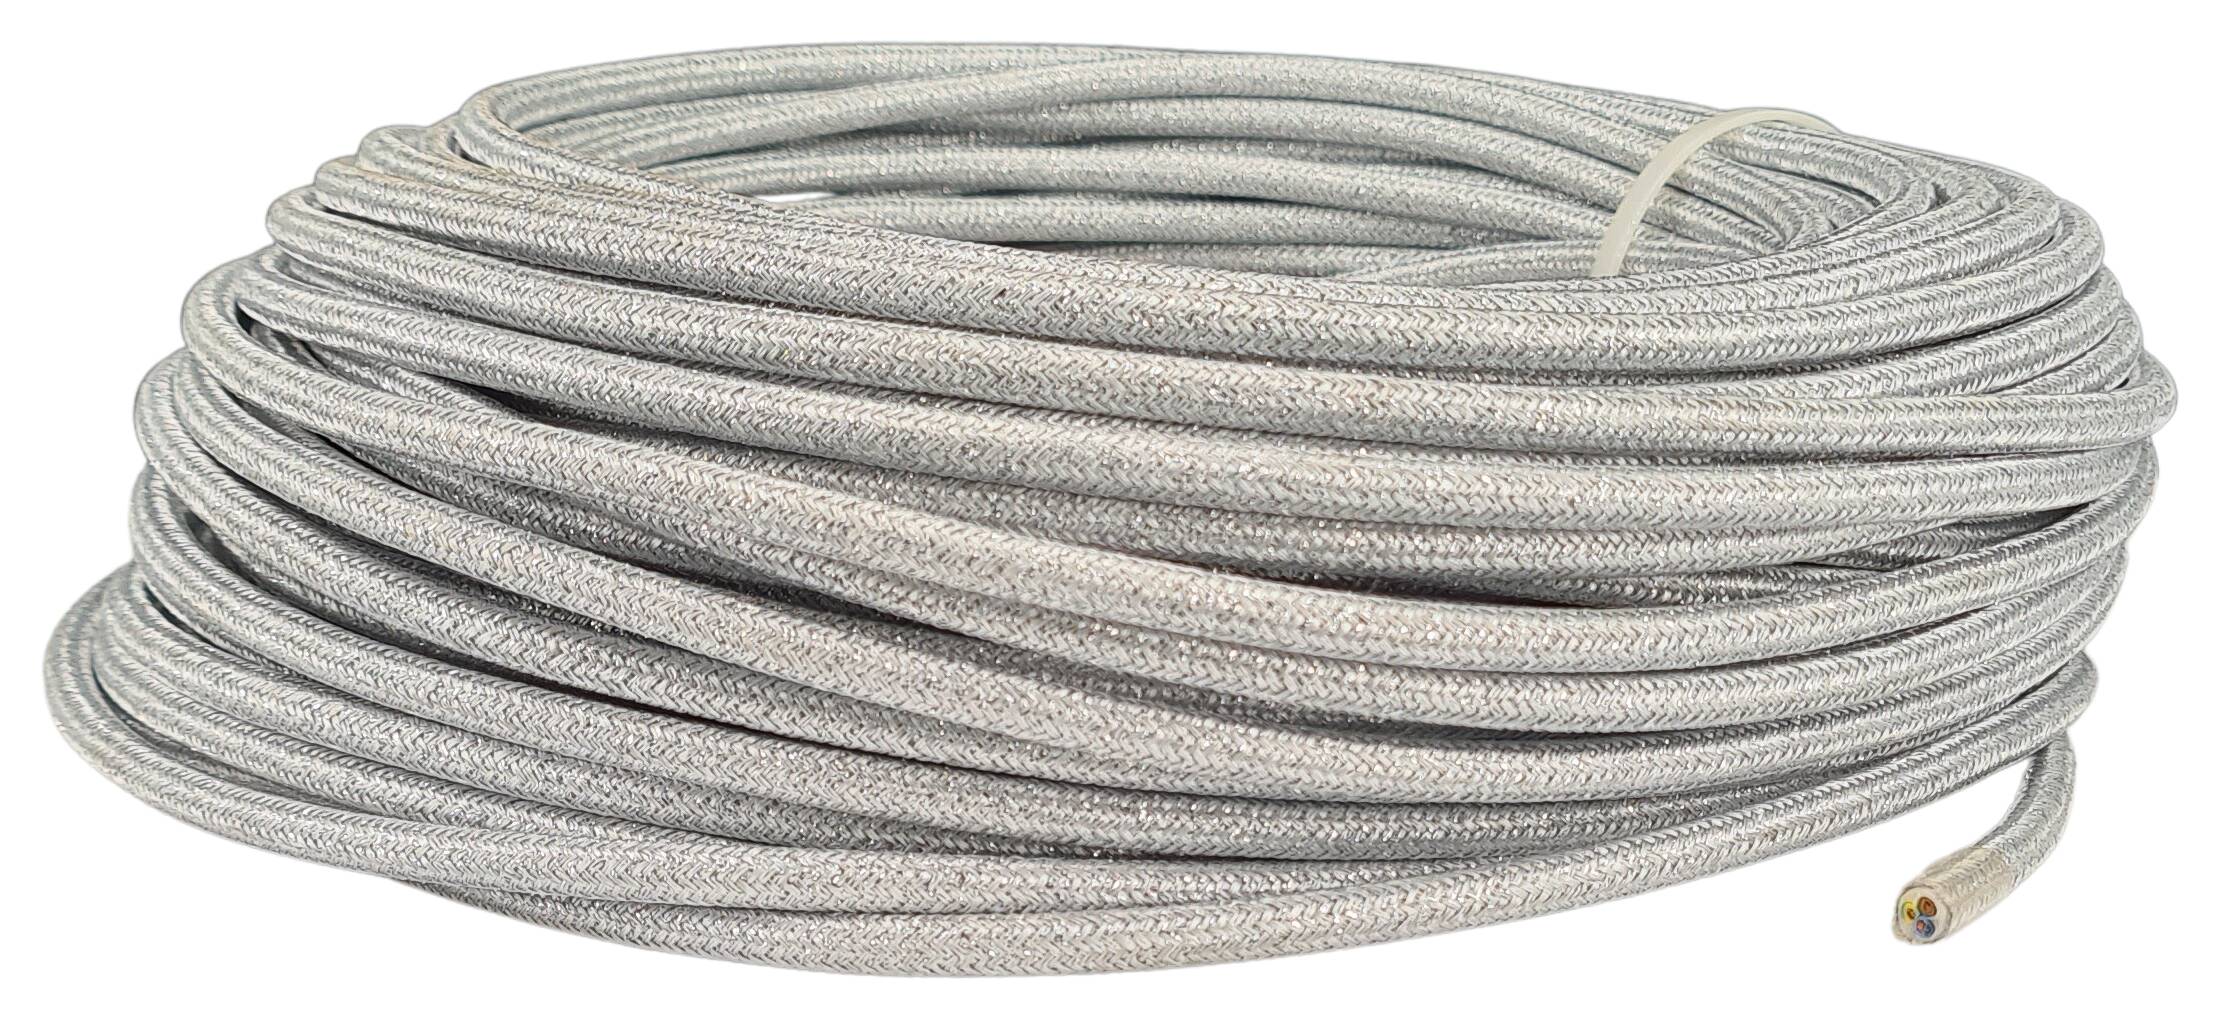 cable 3G 0,75 H03VV-F textile braided metallic RAL 7044 silver